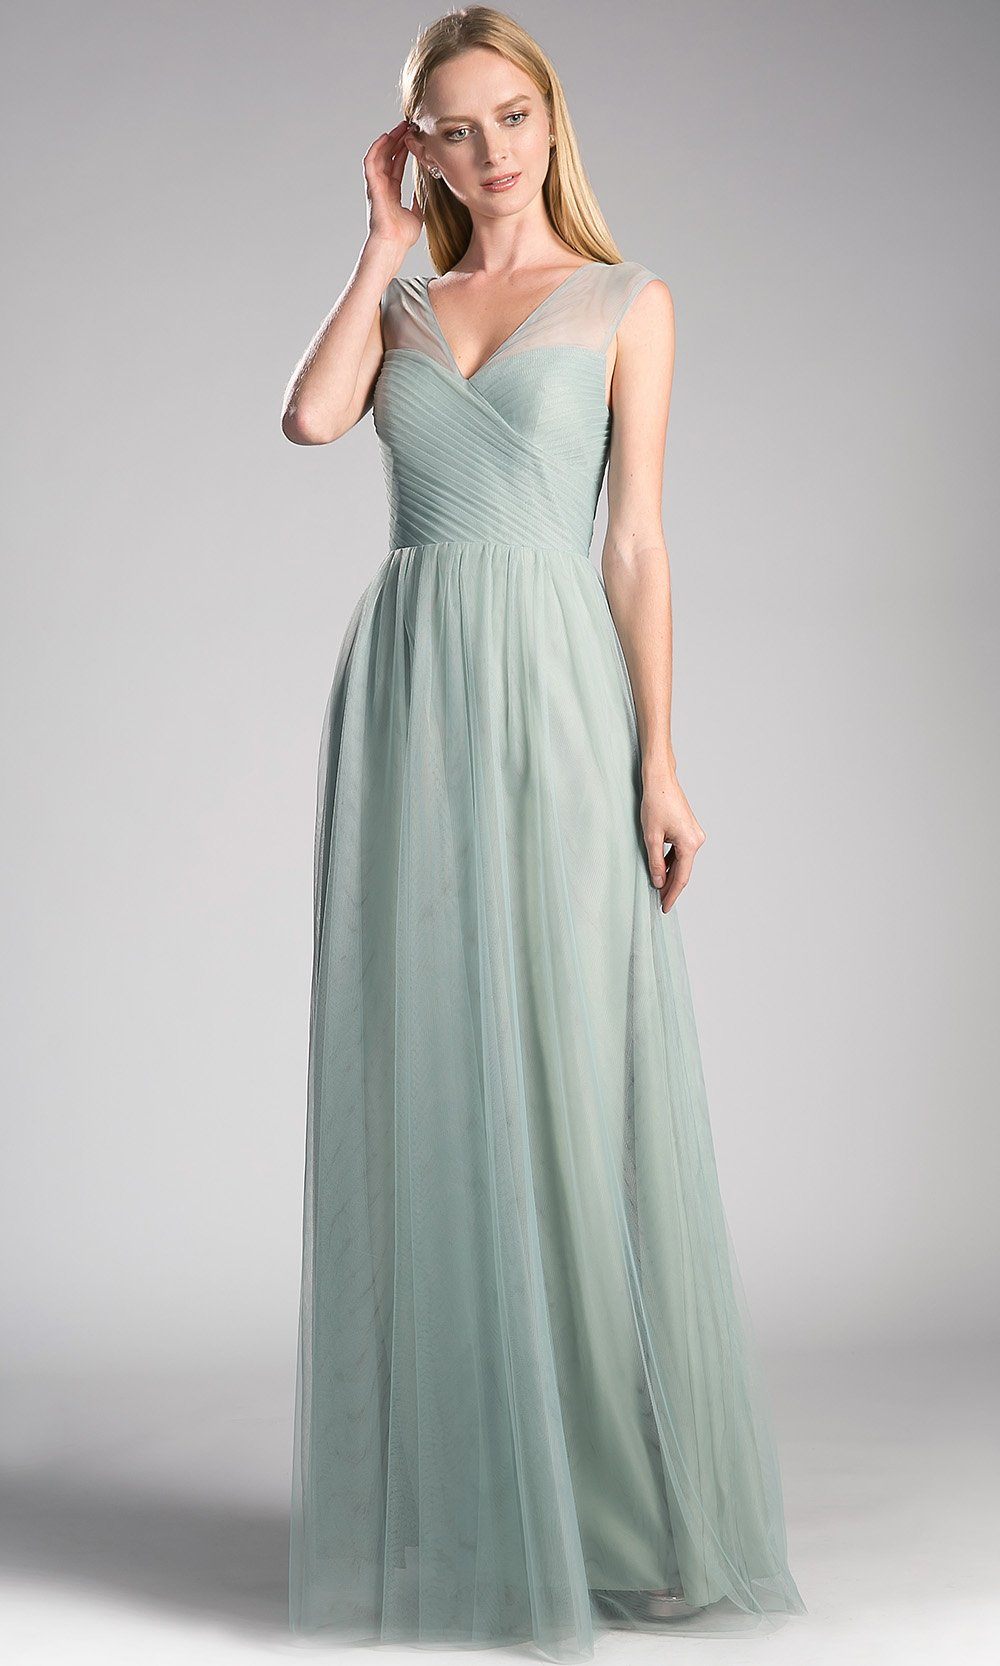 long light green flowy tulle dress with wide straps.This light green dress perfect for bridesmaids, wedding guest dress,formal gown,modest dress,fall wedding,party dress, black tie evening gown. plus size dresses avail.